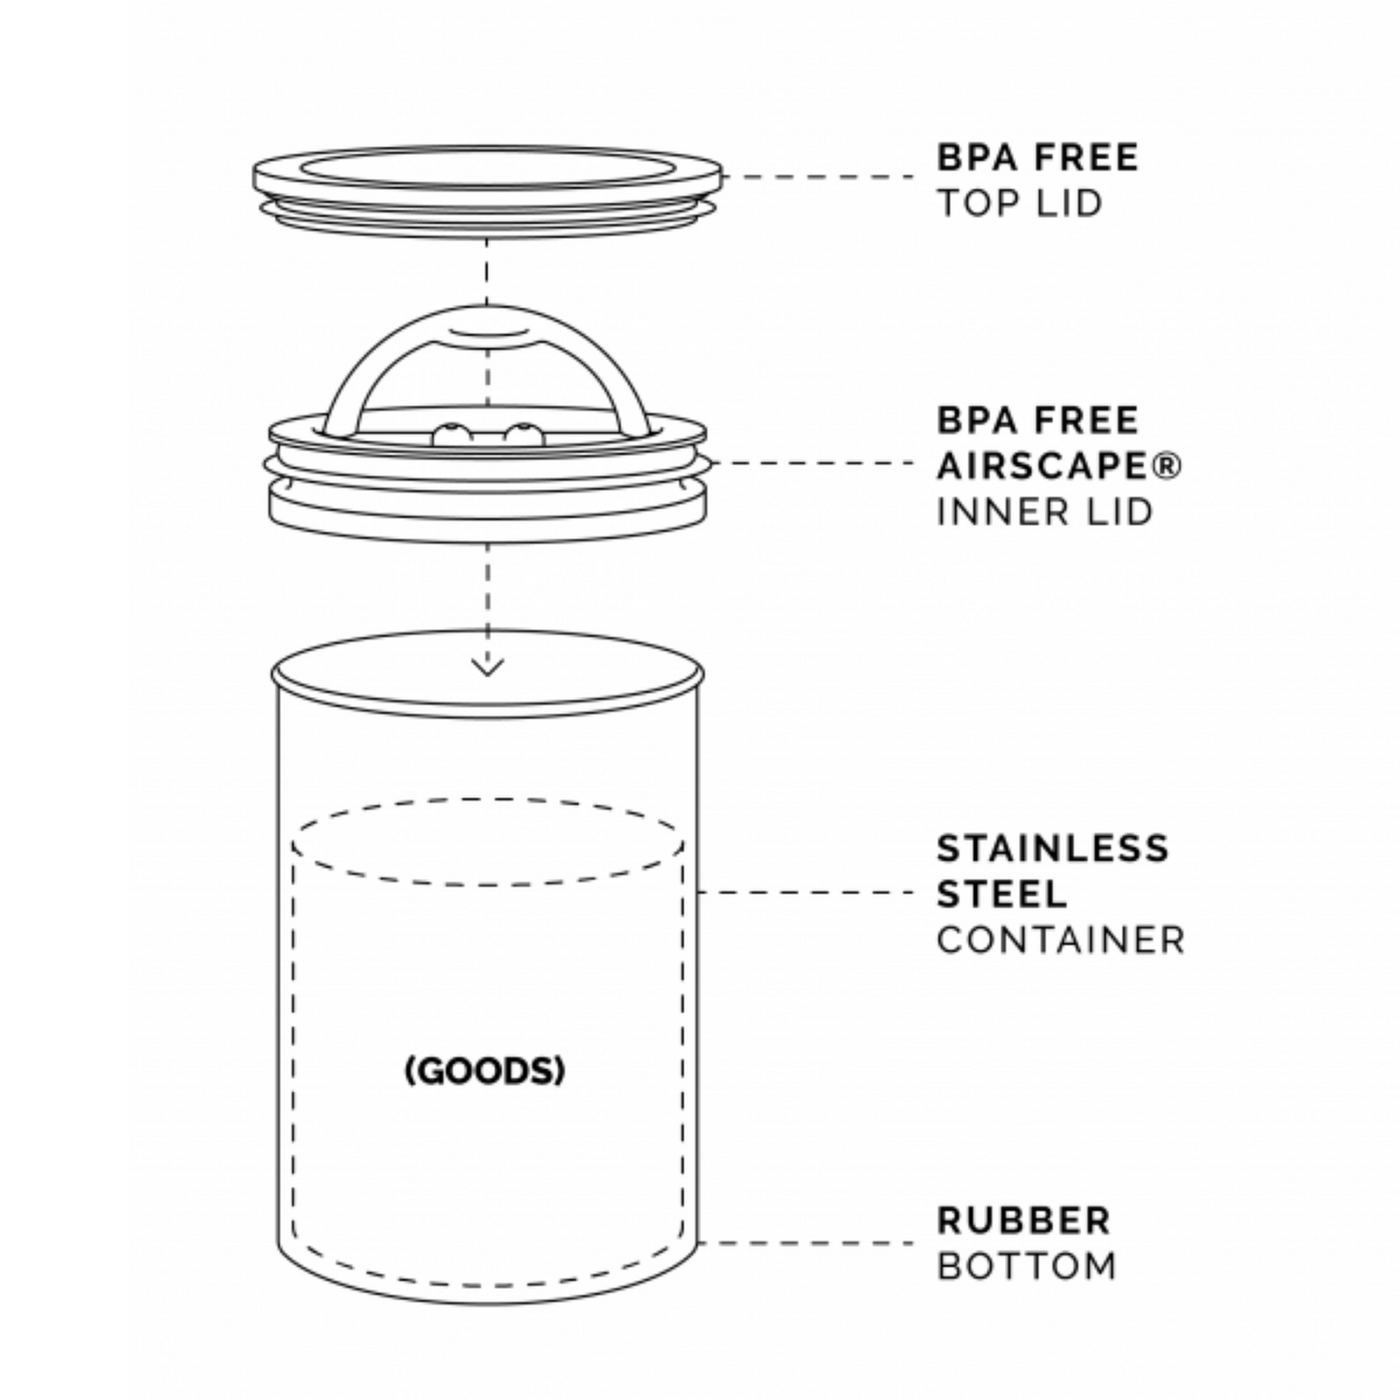 illustration of the Airscape canister, showing the BPA-free top lid, the BPA-free Airscape patented inner lid, the stainless steel container, an outline of where the goods would be in the canister, and the rubberized bottom